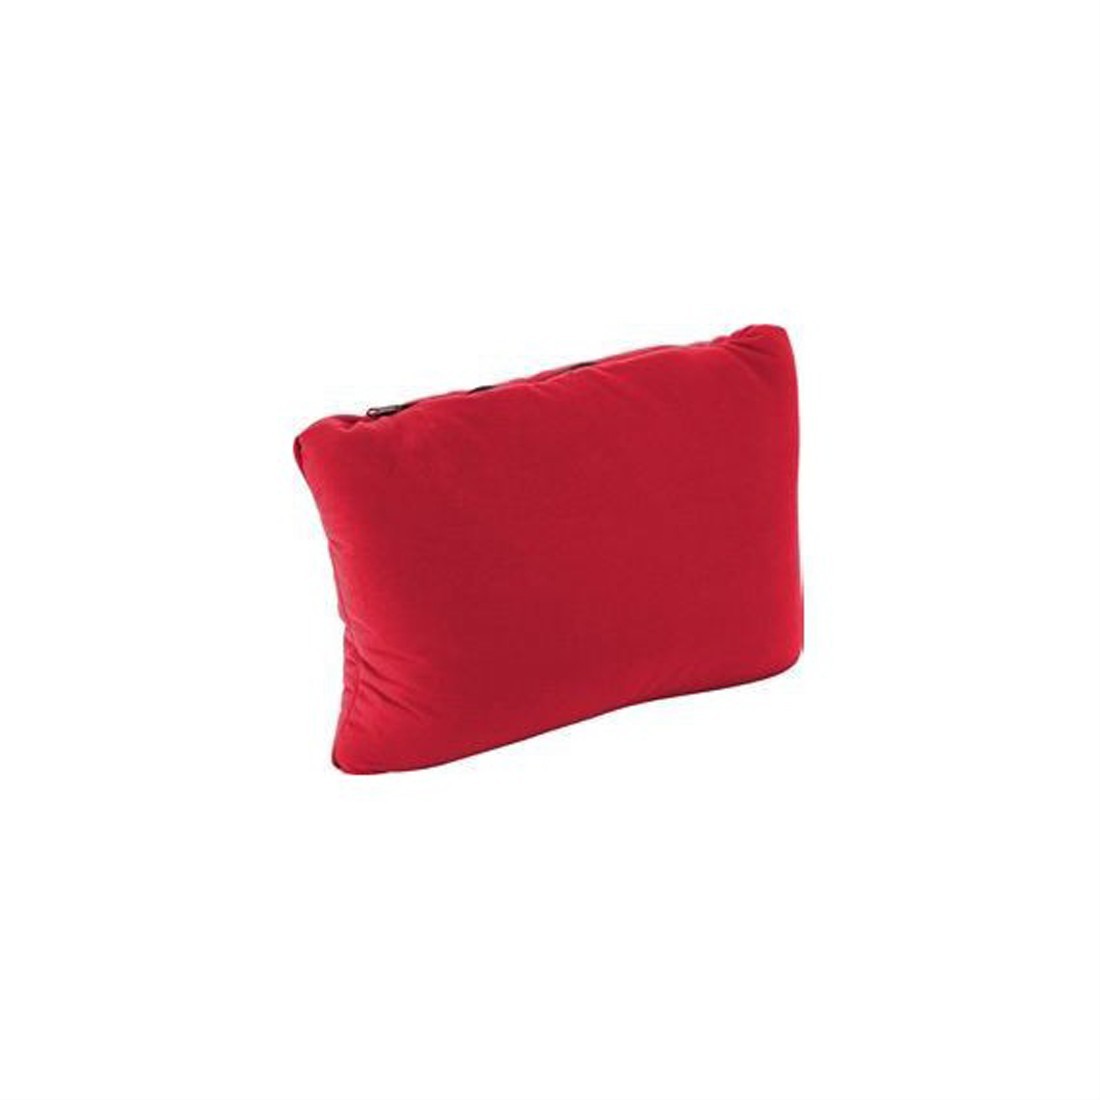 Order Trekmates Deluxe Raspberry Pillow - Trekmates, delivered to your home  | TheOutfit